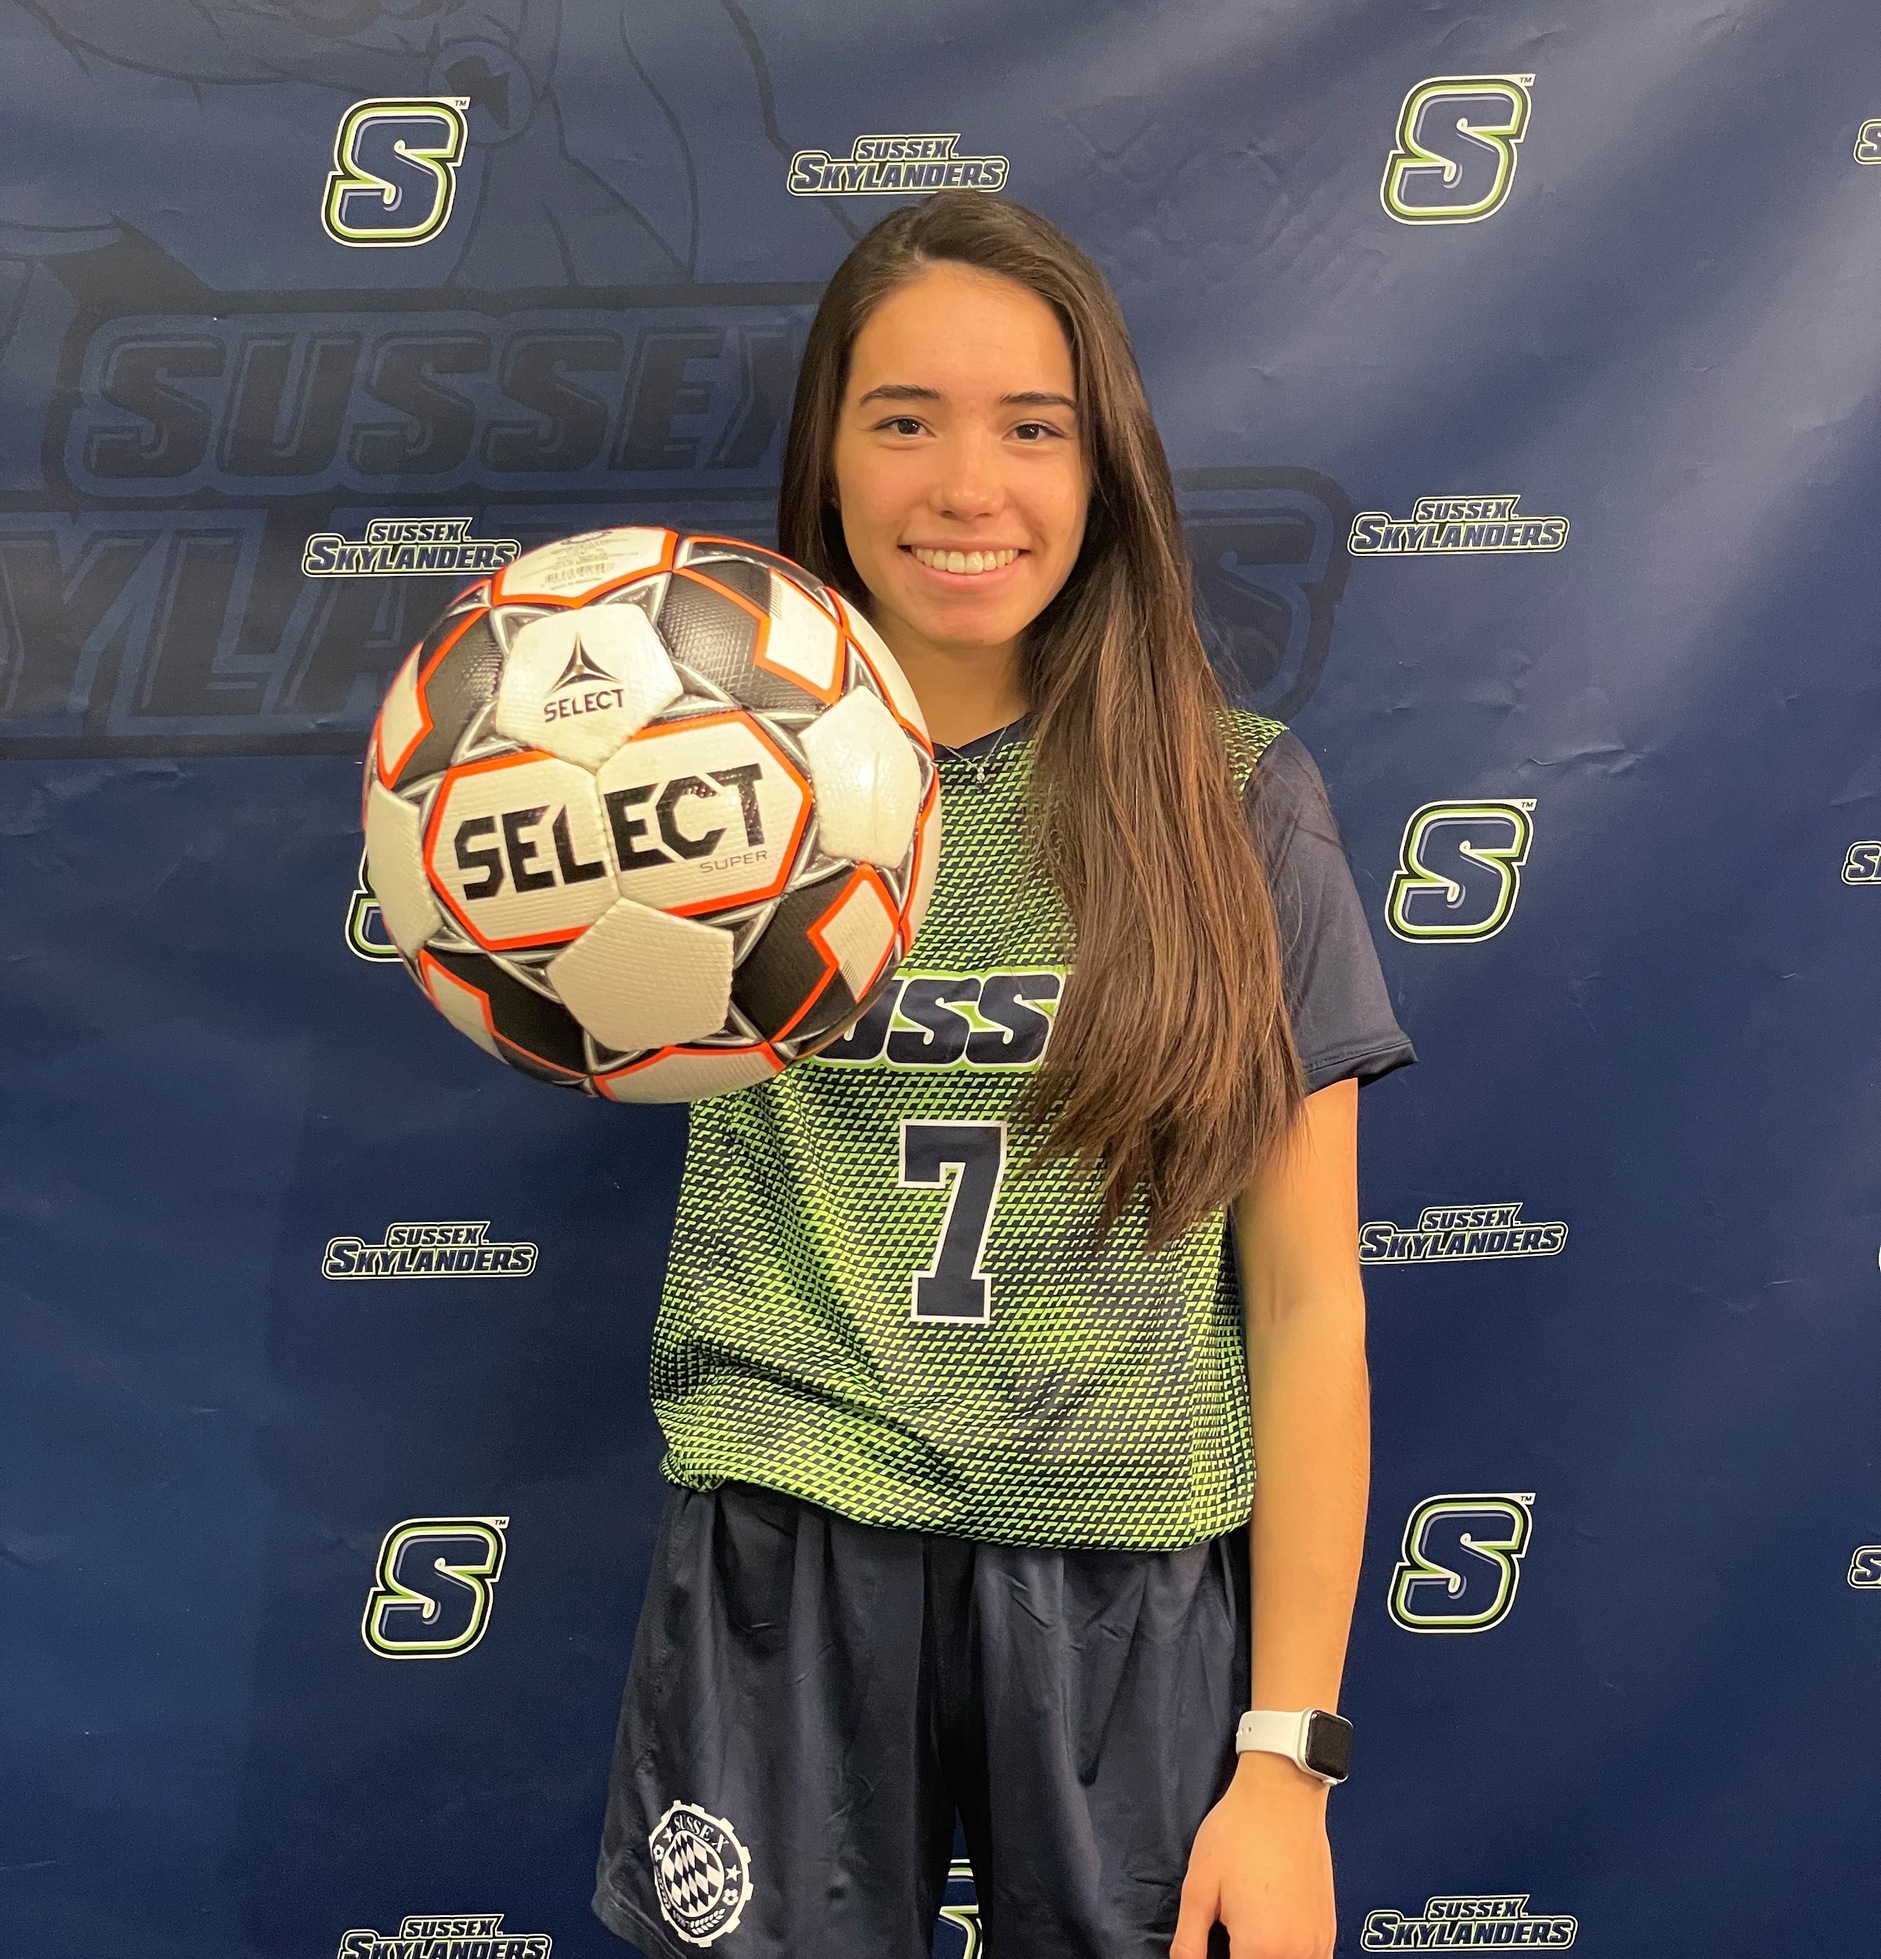 Velez Scores to push Sussex past Rowan College South Jersey Gloucester